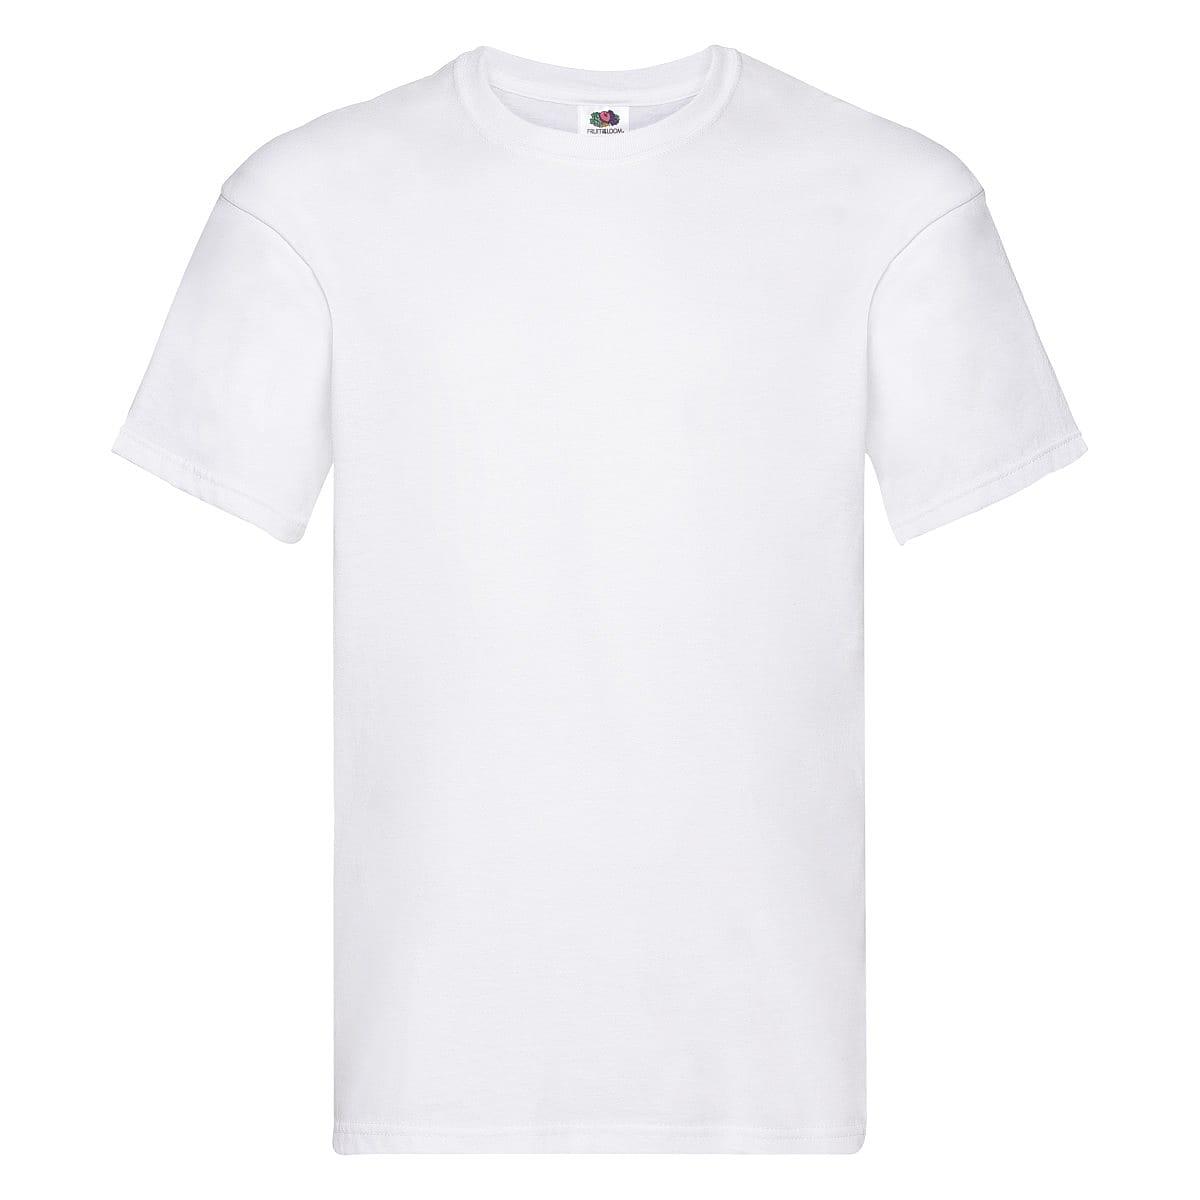 Fruit Of The Loom Original Full Cut T-Shirt in White (Product Code: 61082)